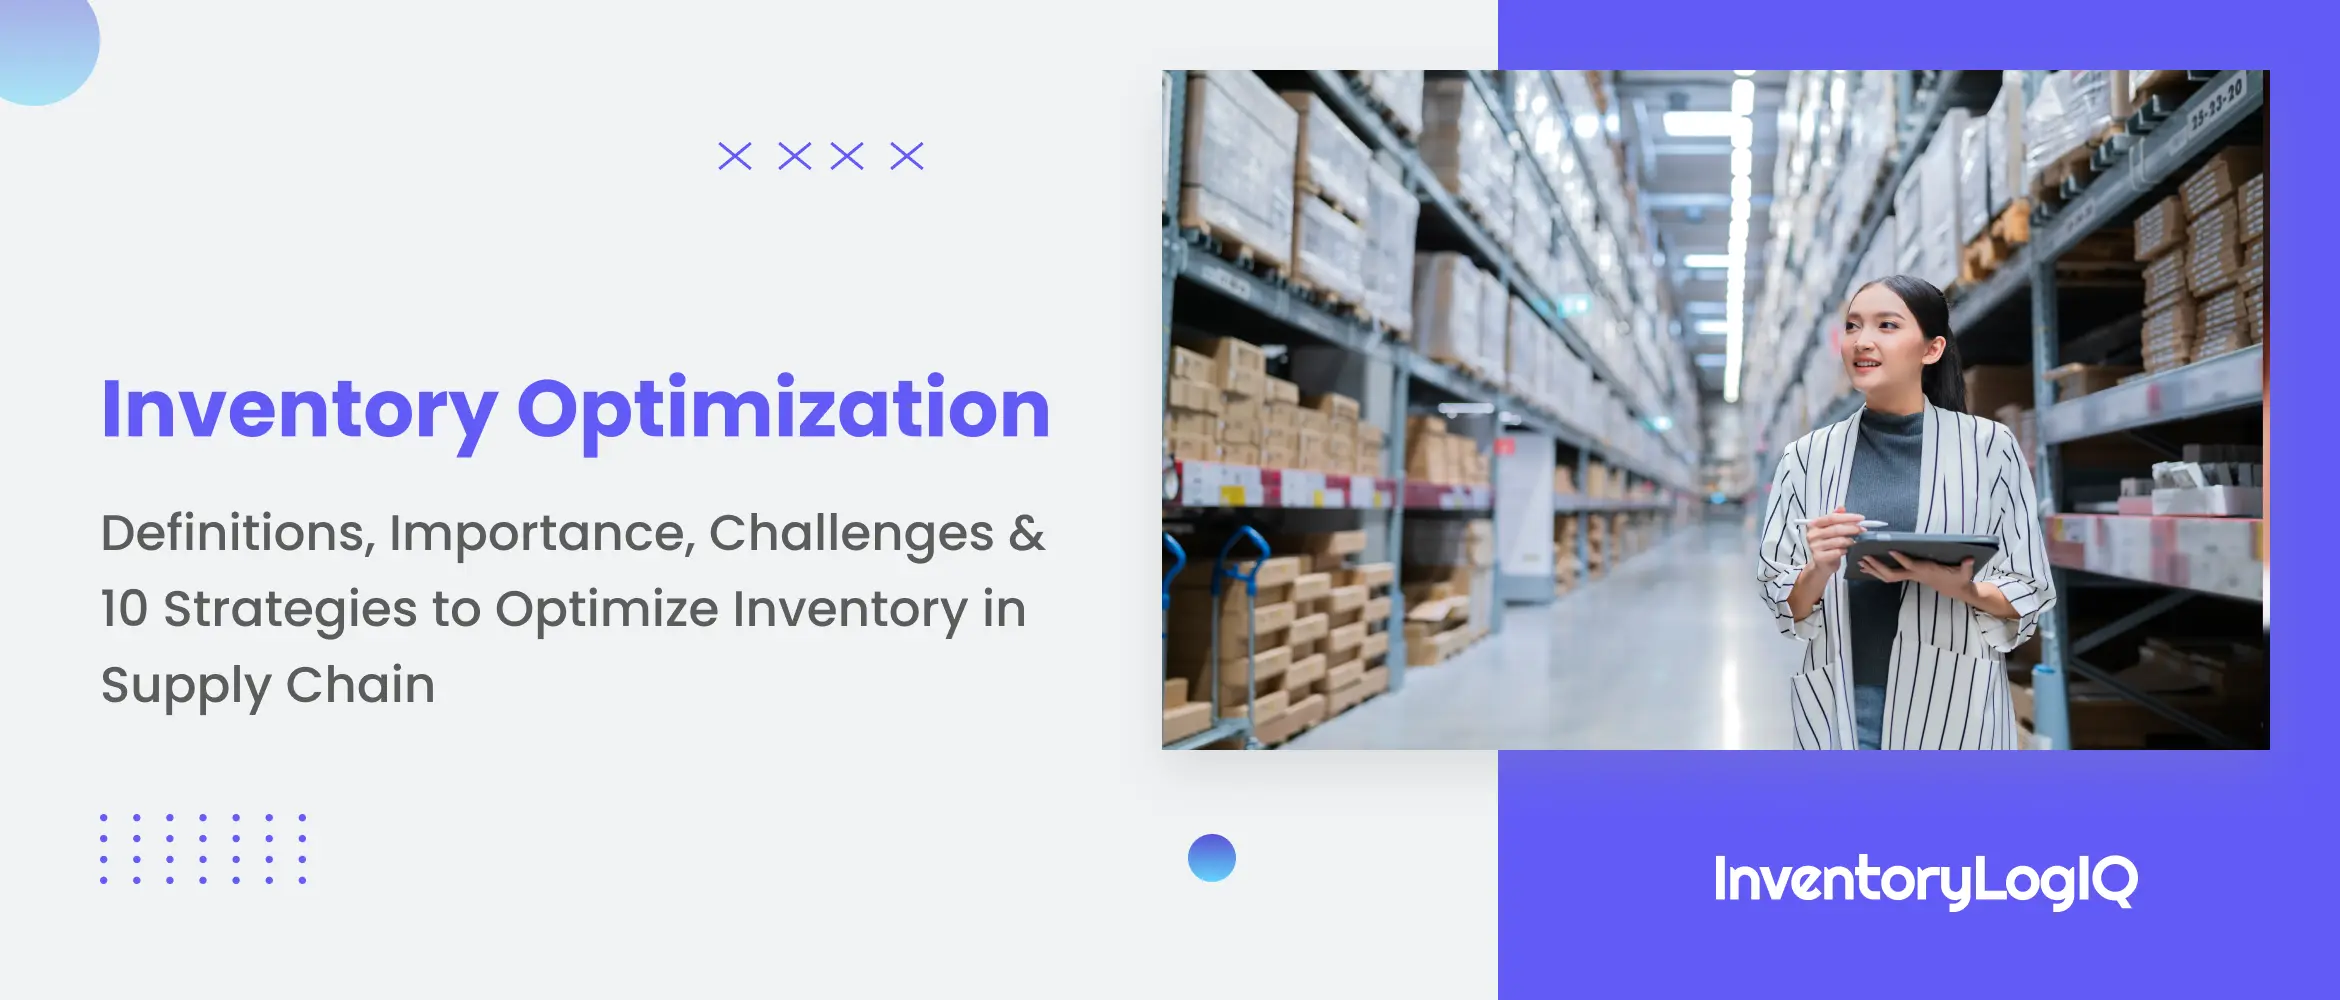 Inventory Optimization 101: Definition, Importance, Challenges & 10 Best Practices to Optimize Inventory in Supply Chain in 2023